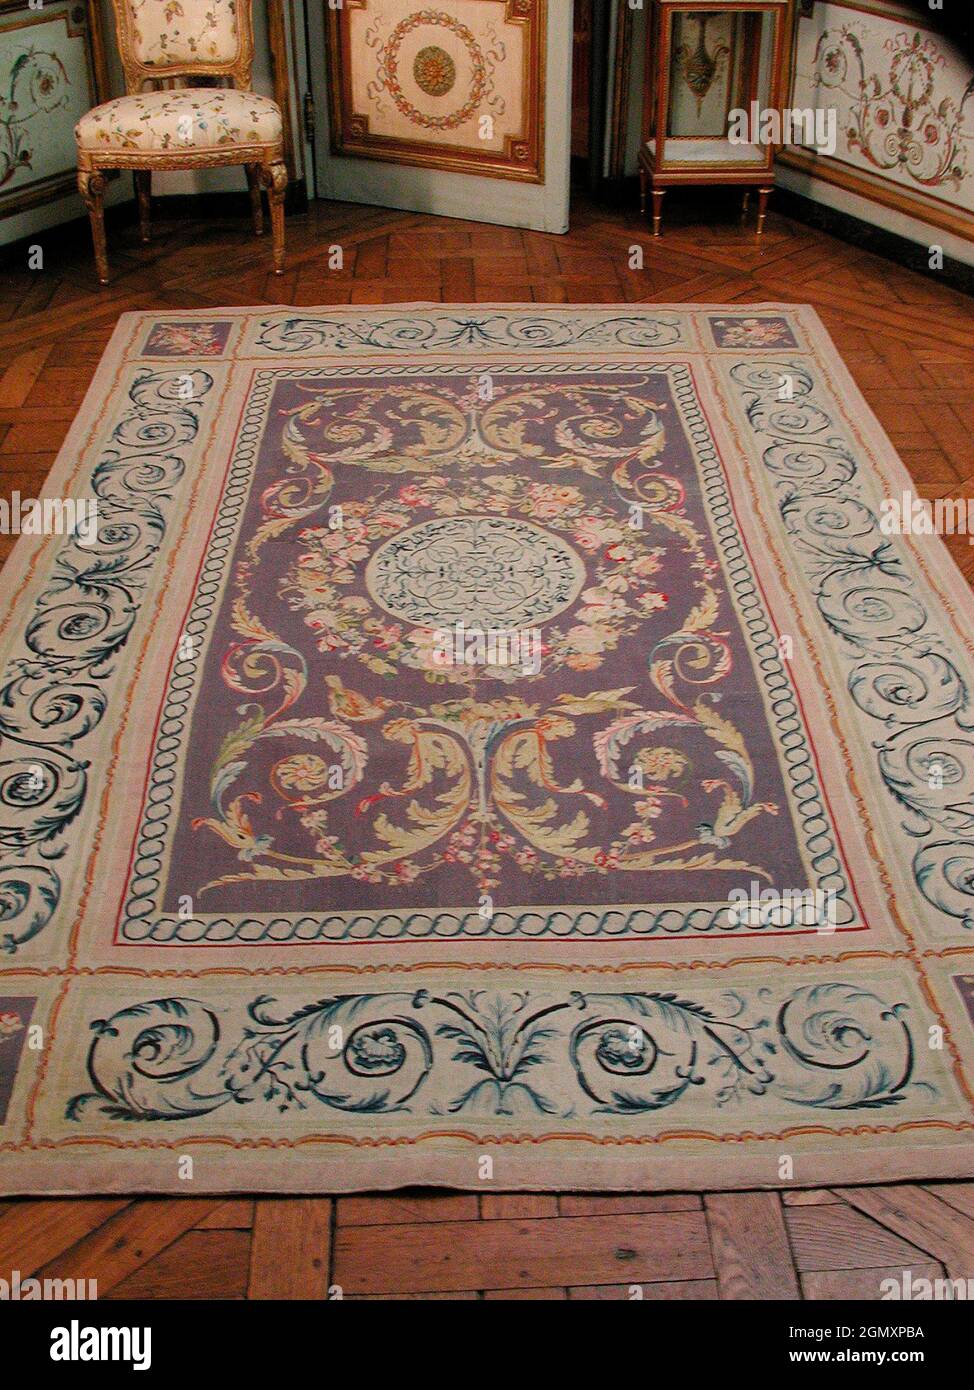 Carpet. Manufactory: Beauvais; Date: ca. 1787-90; Culture: French, Beauvais; Medium: Wool; Dimensions: Overall (confirmed): 102-3/4 x 66-1/2 in. (261 Stock Photo